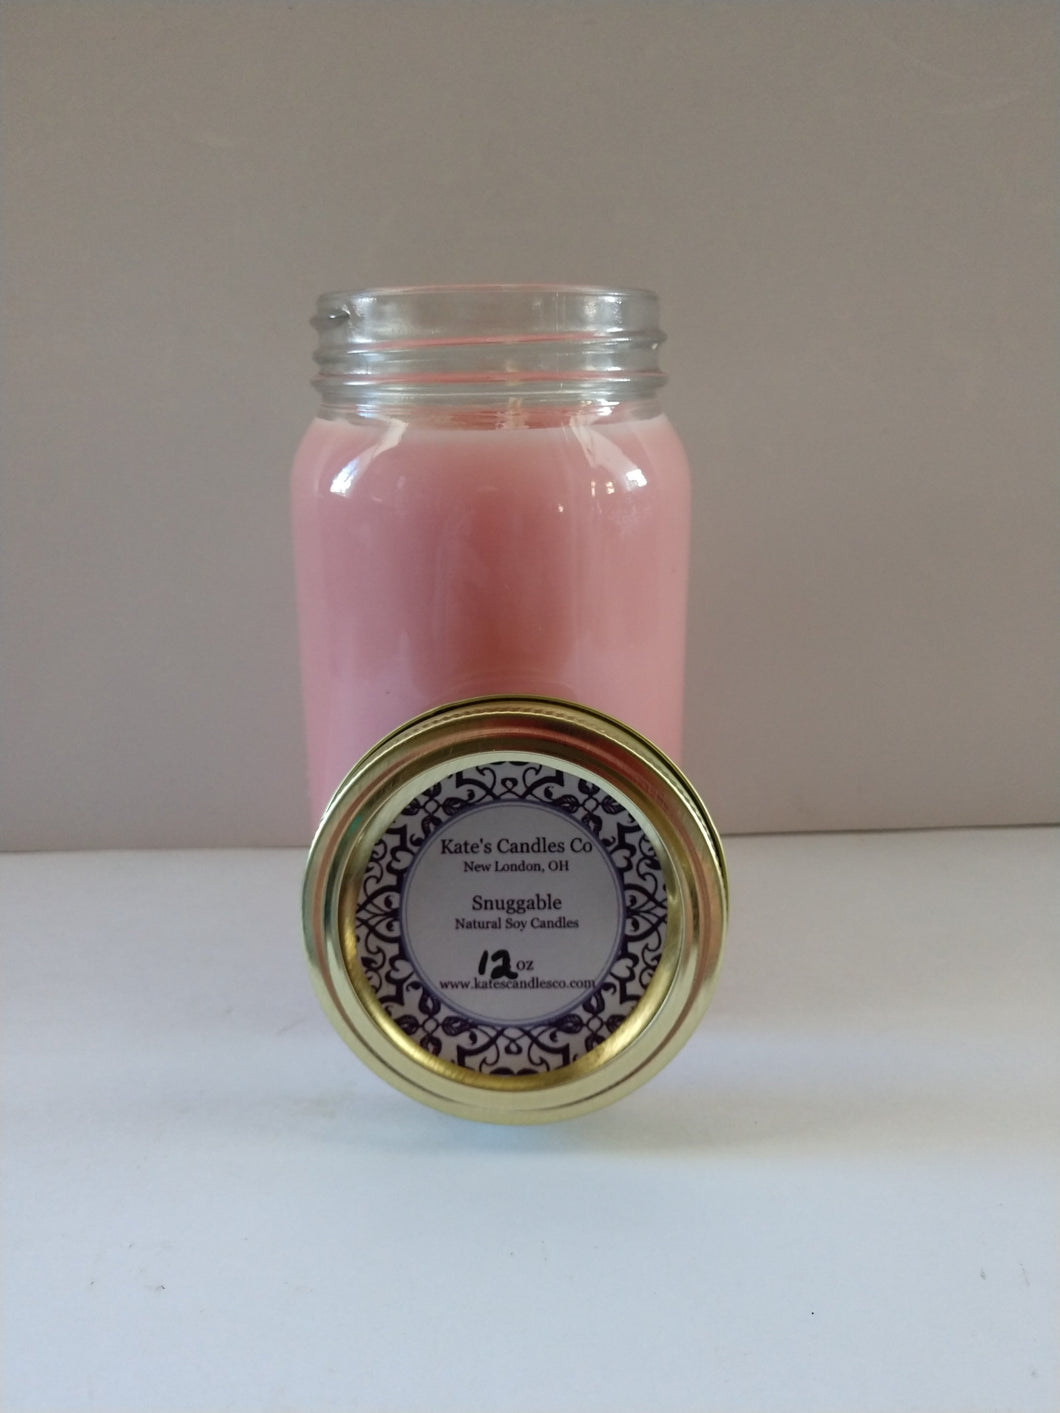 Snuggable Scented Soy Candles - Kate's Candles Co. Soy Candles